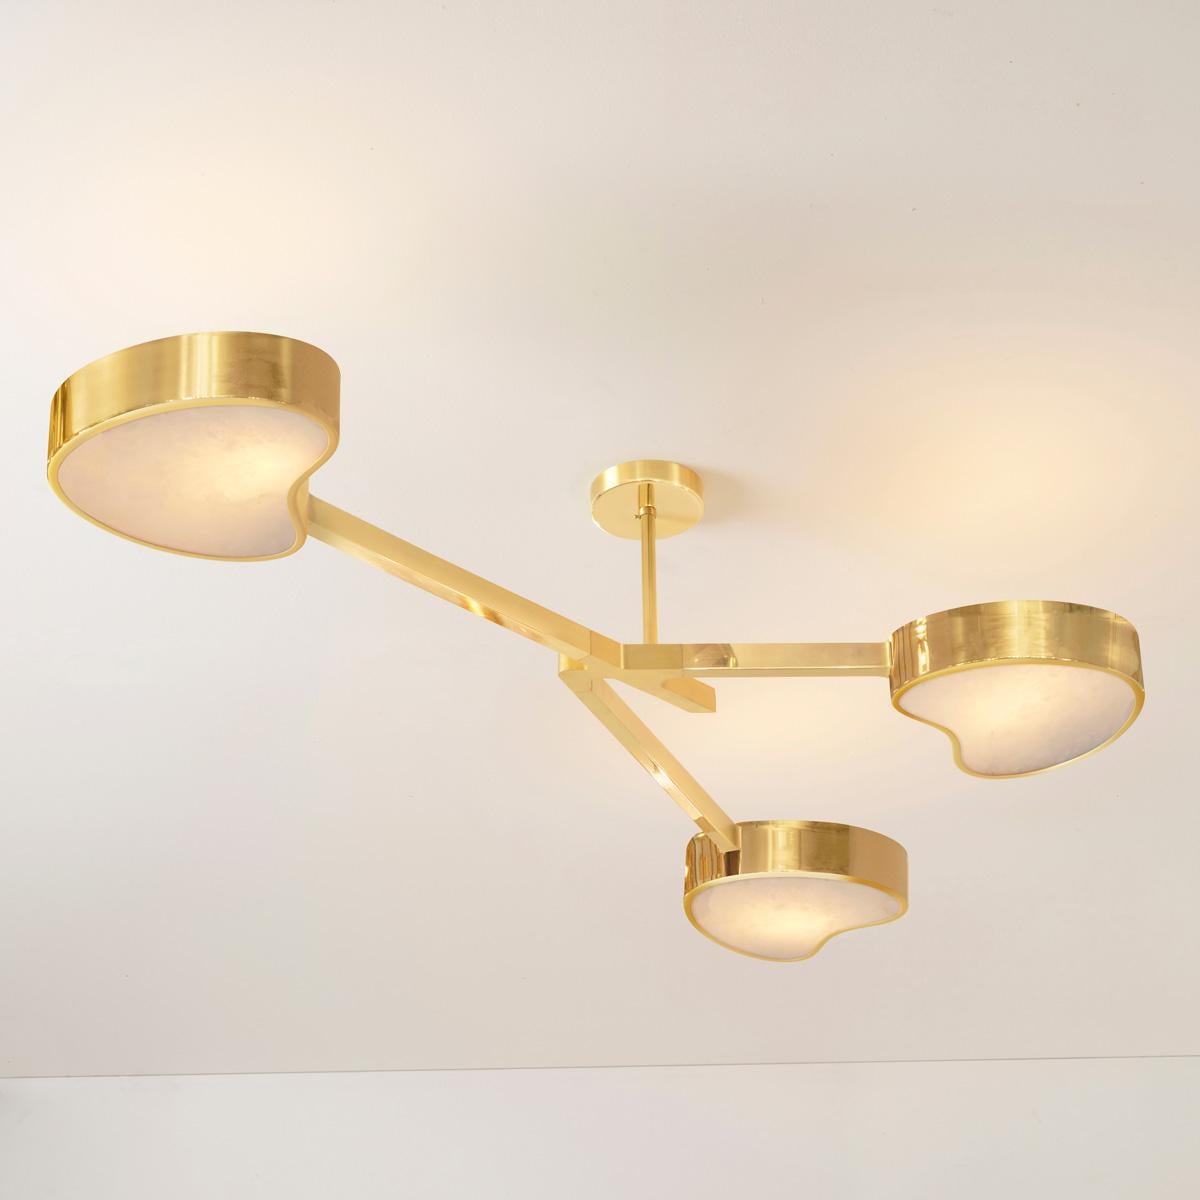 Cuore N.3 Ceiling Light by Gaspare Asaro. Peltro and Bronze Finish In New Condition For Sale In New York, NY